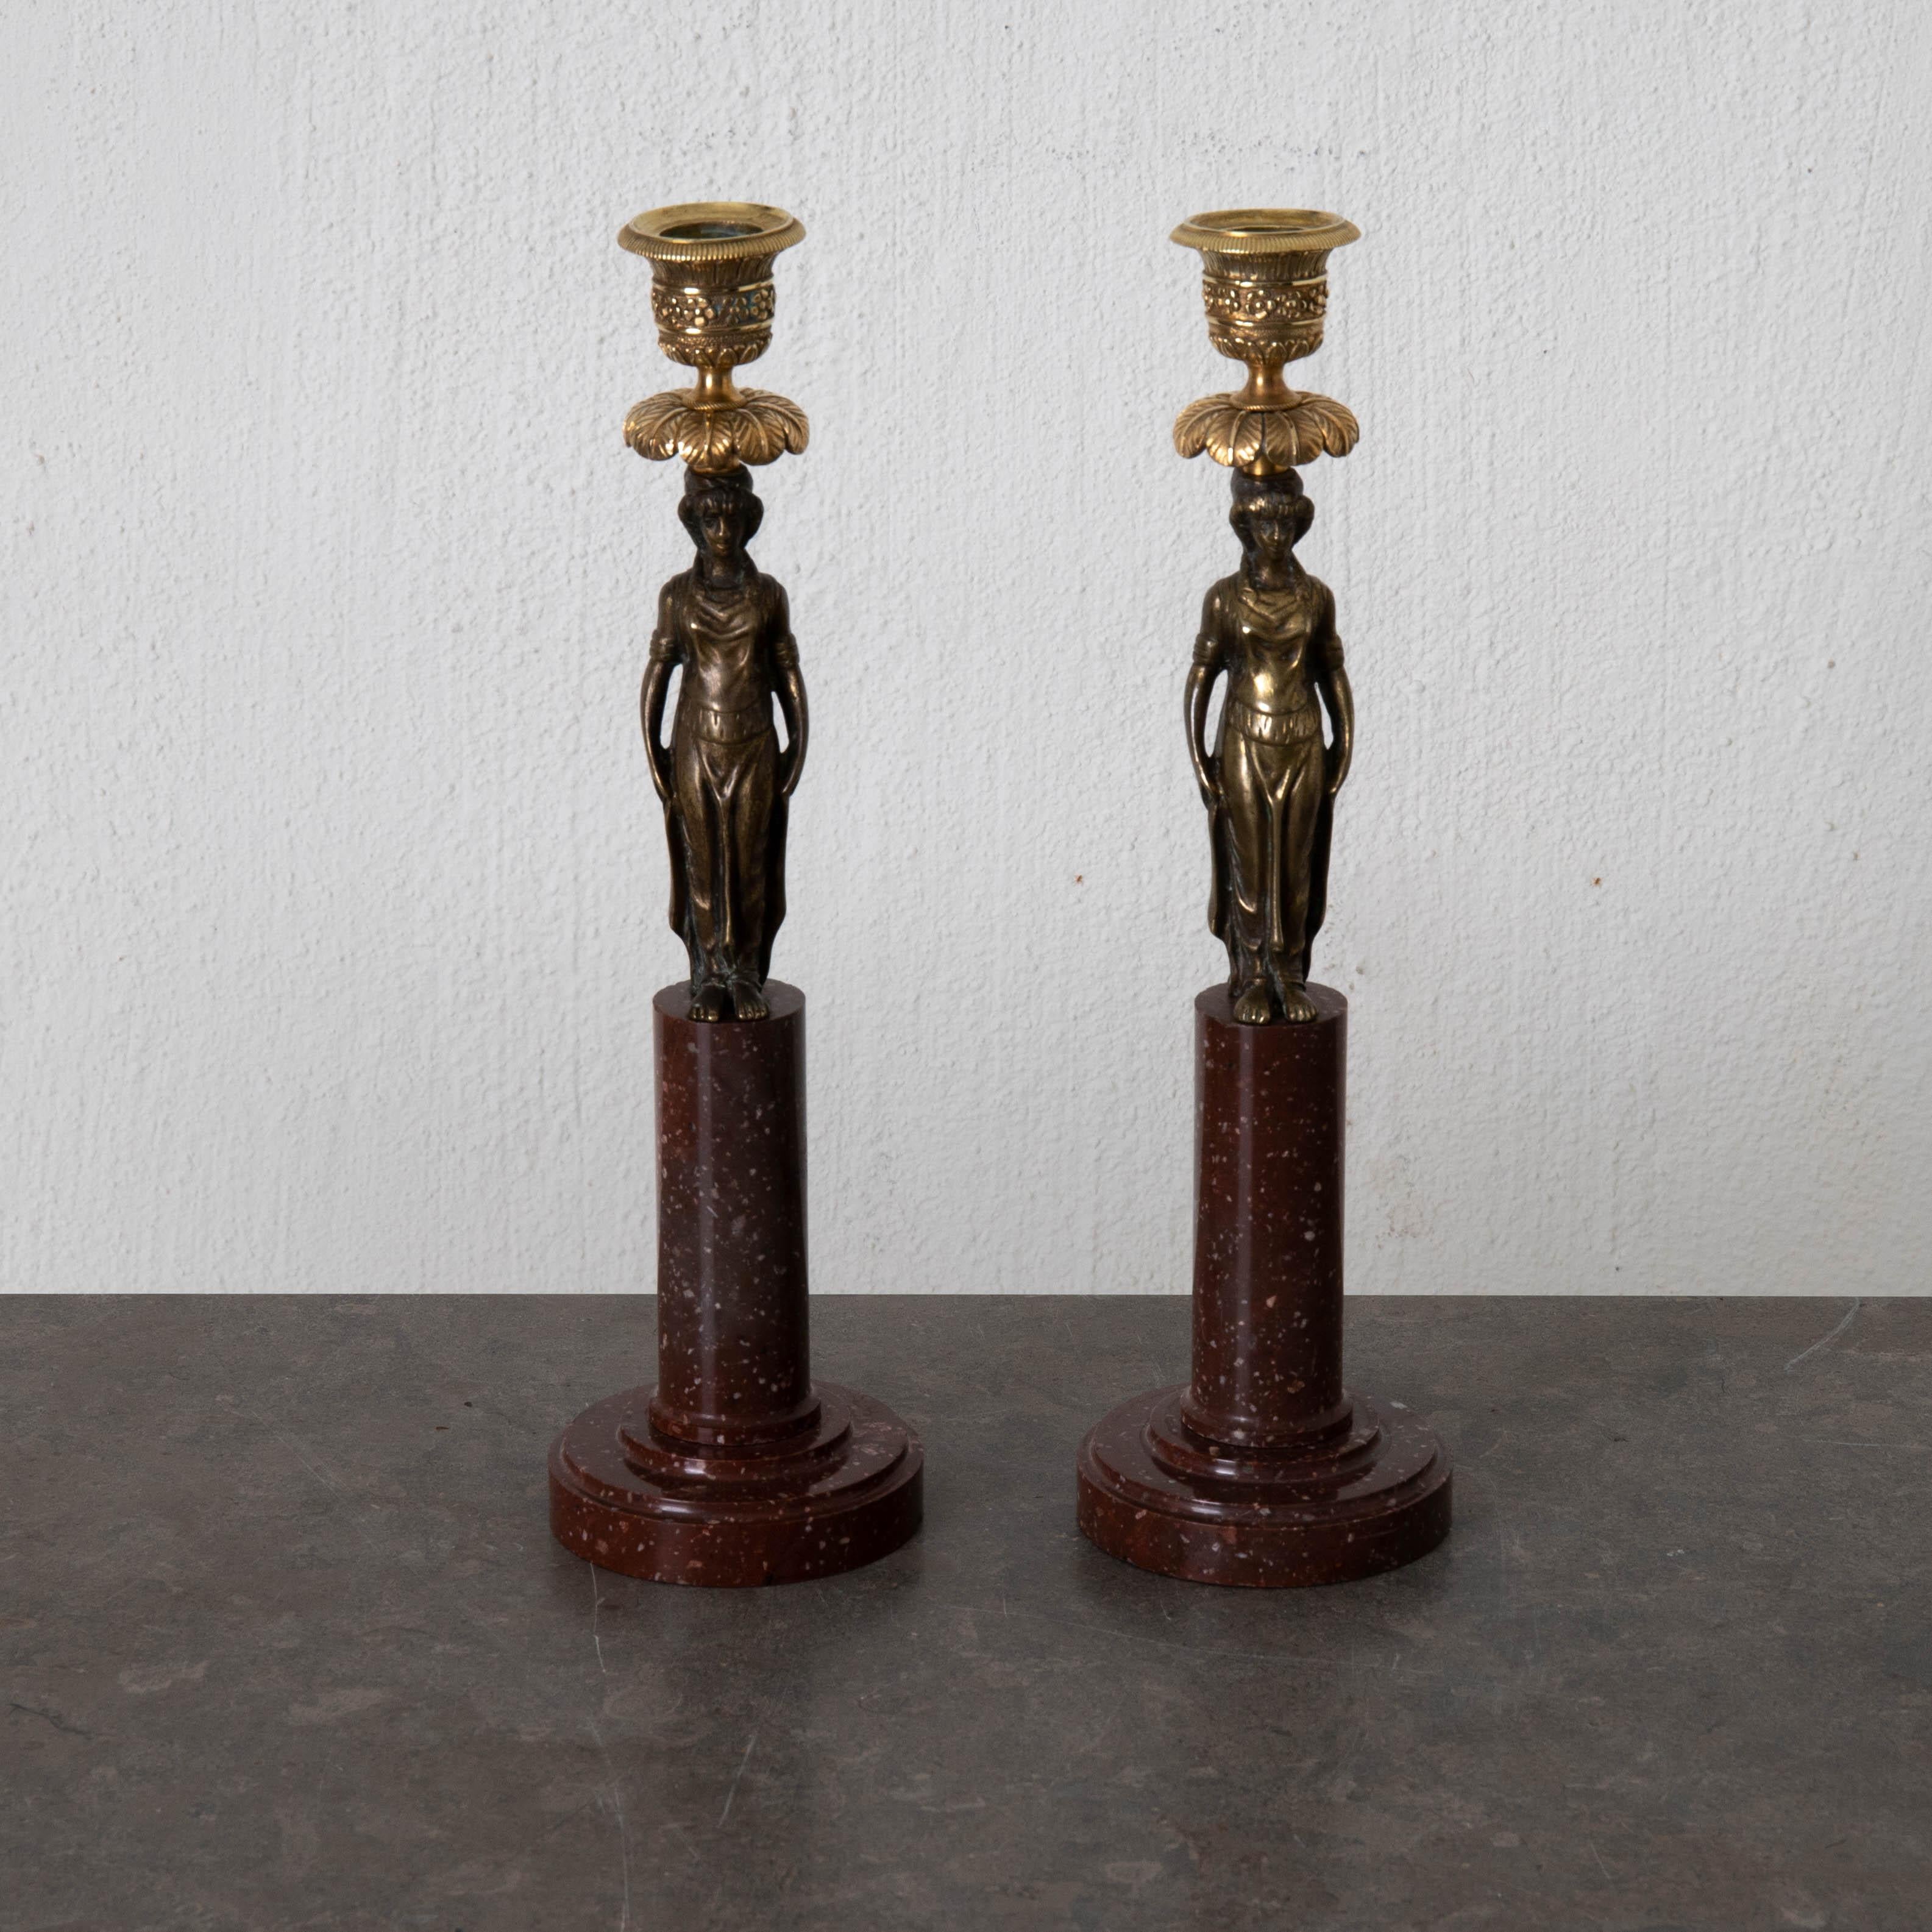 Candlesticks Gustavian pair Swedish 18th century red marble dark bronze Sweden. A pair of candlesticks made during the early 19th century in Sweden. Base in red marble with women shaped figurines in black patinated bronze and gilt bronze